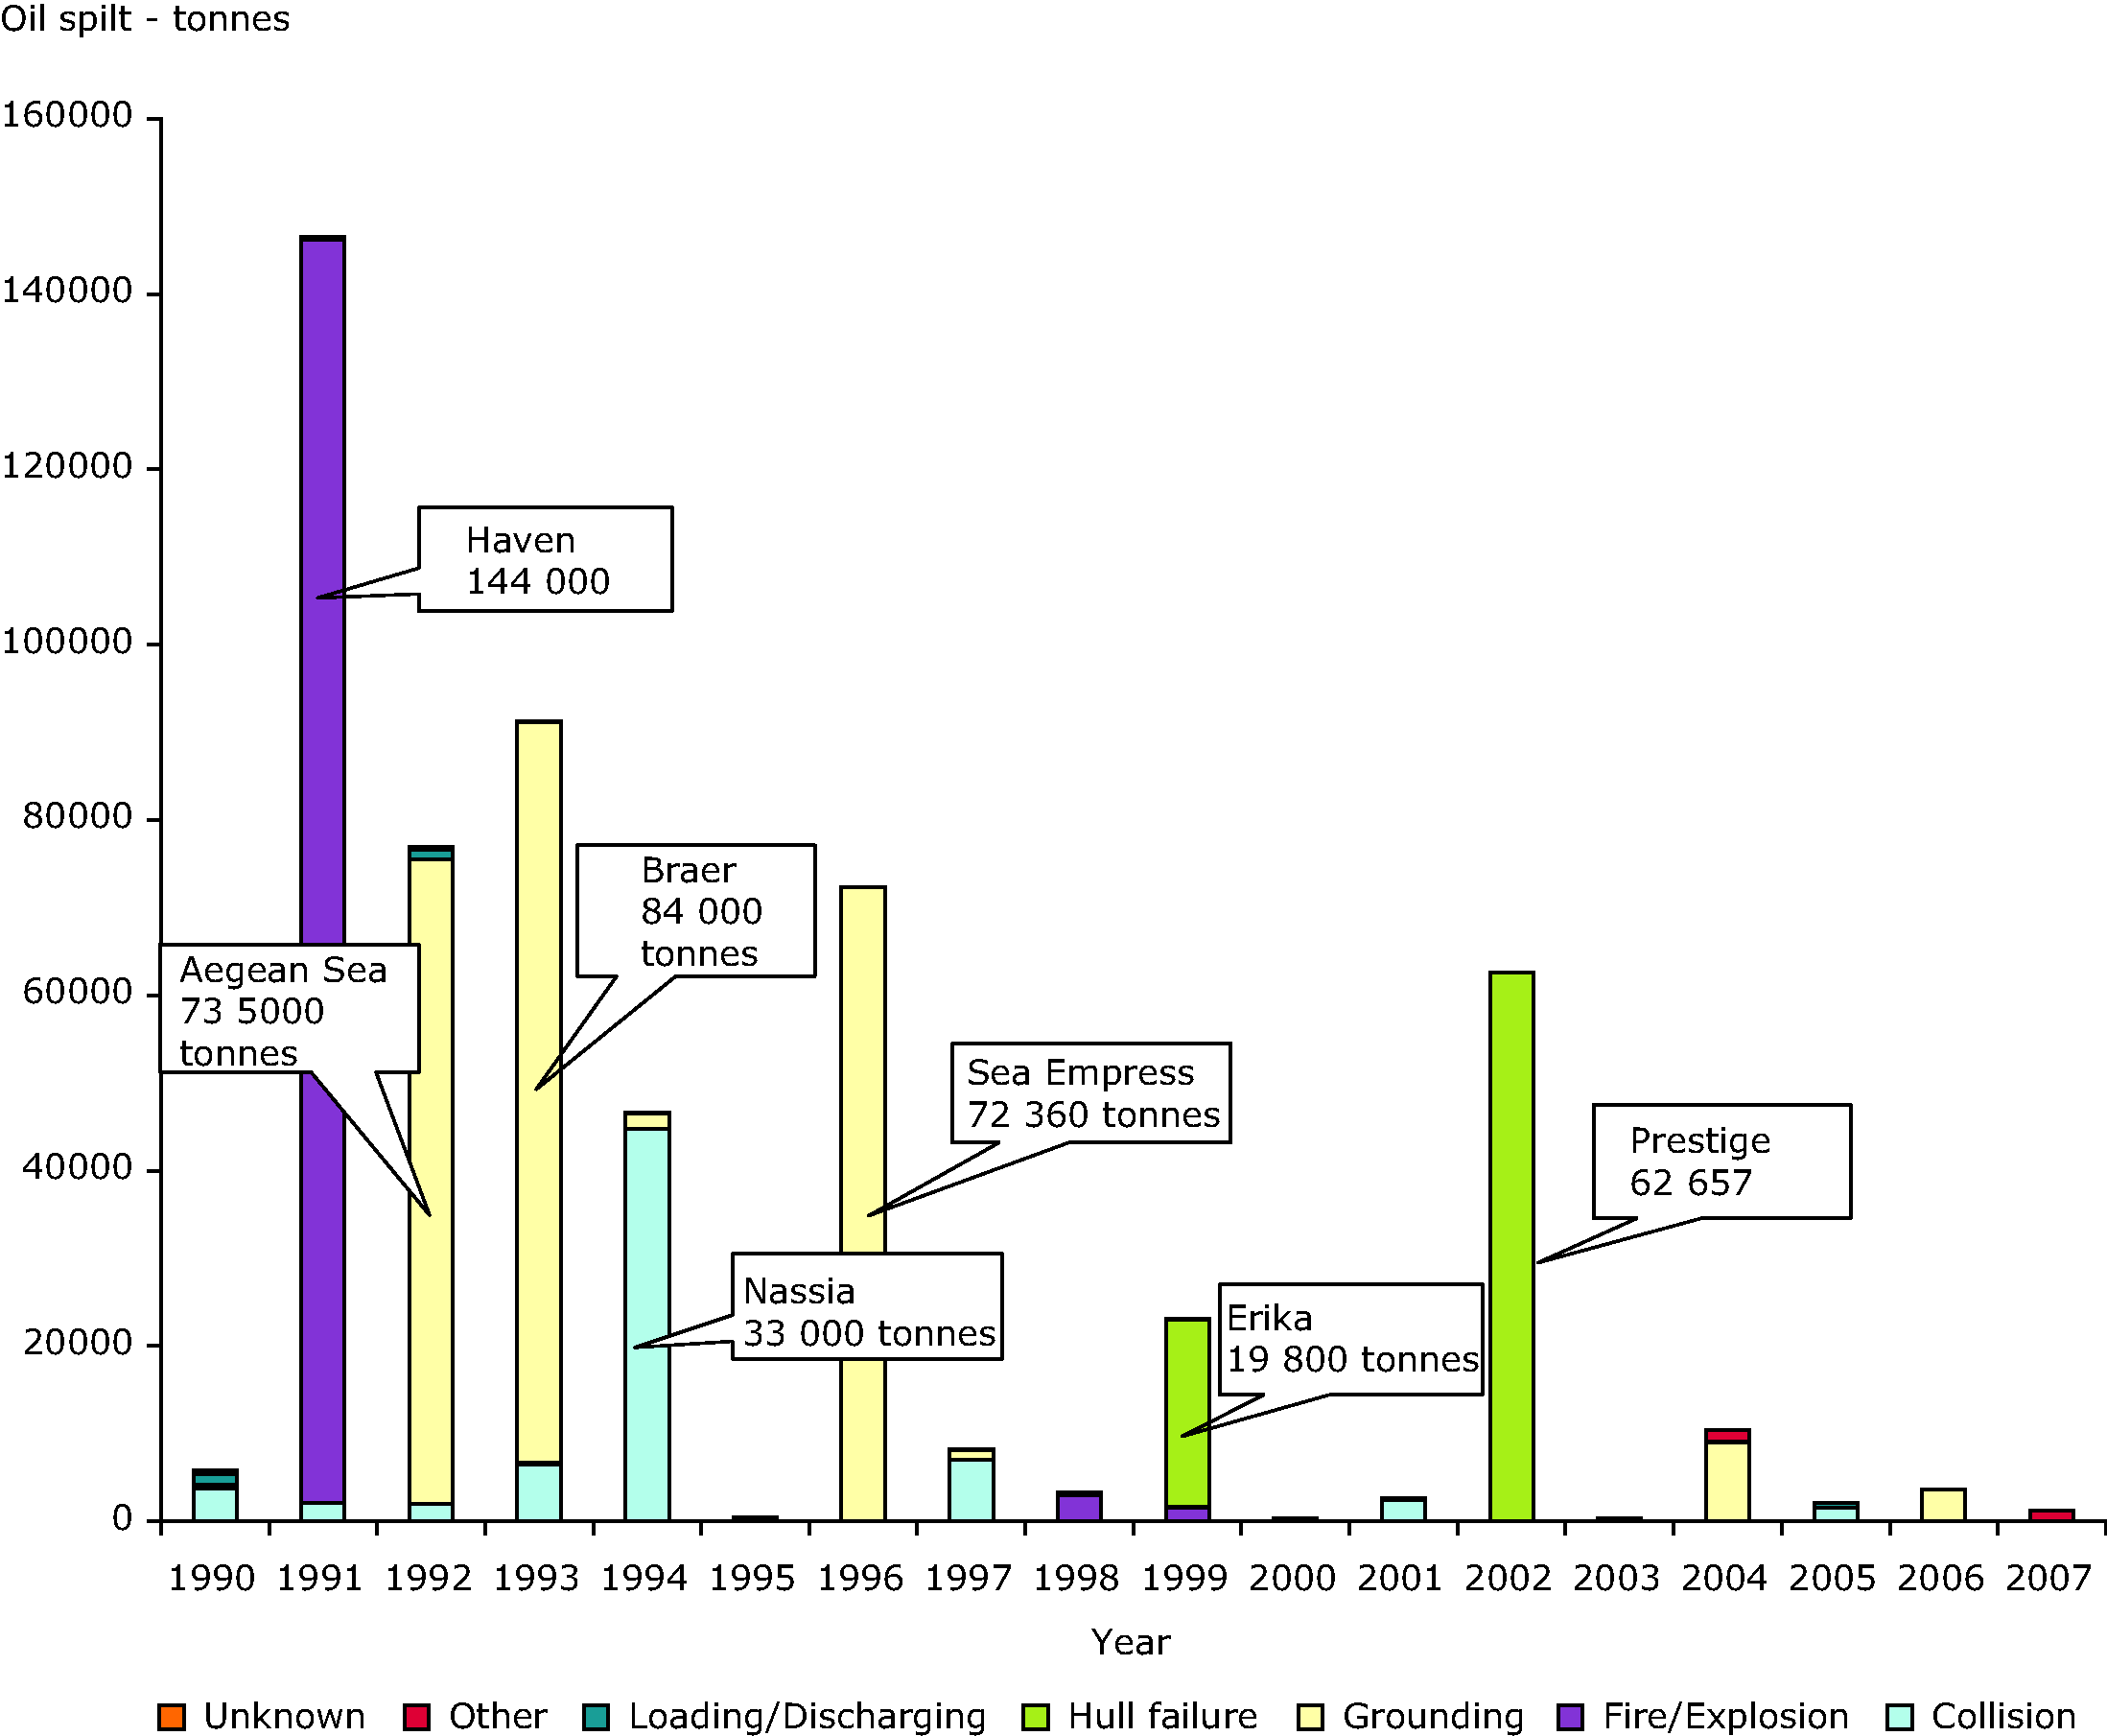 Volume of oil spilt (>7 tonnes oil spilt) in European waters by cause between 1990 and 2007 - Major oil spills listed in Figure 2 are also indicated